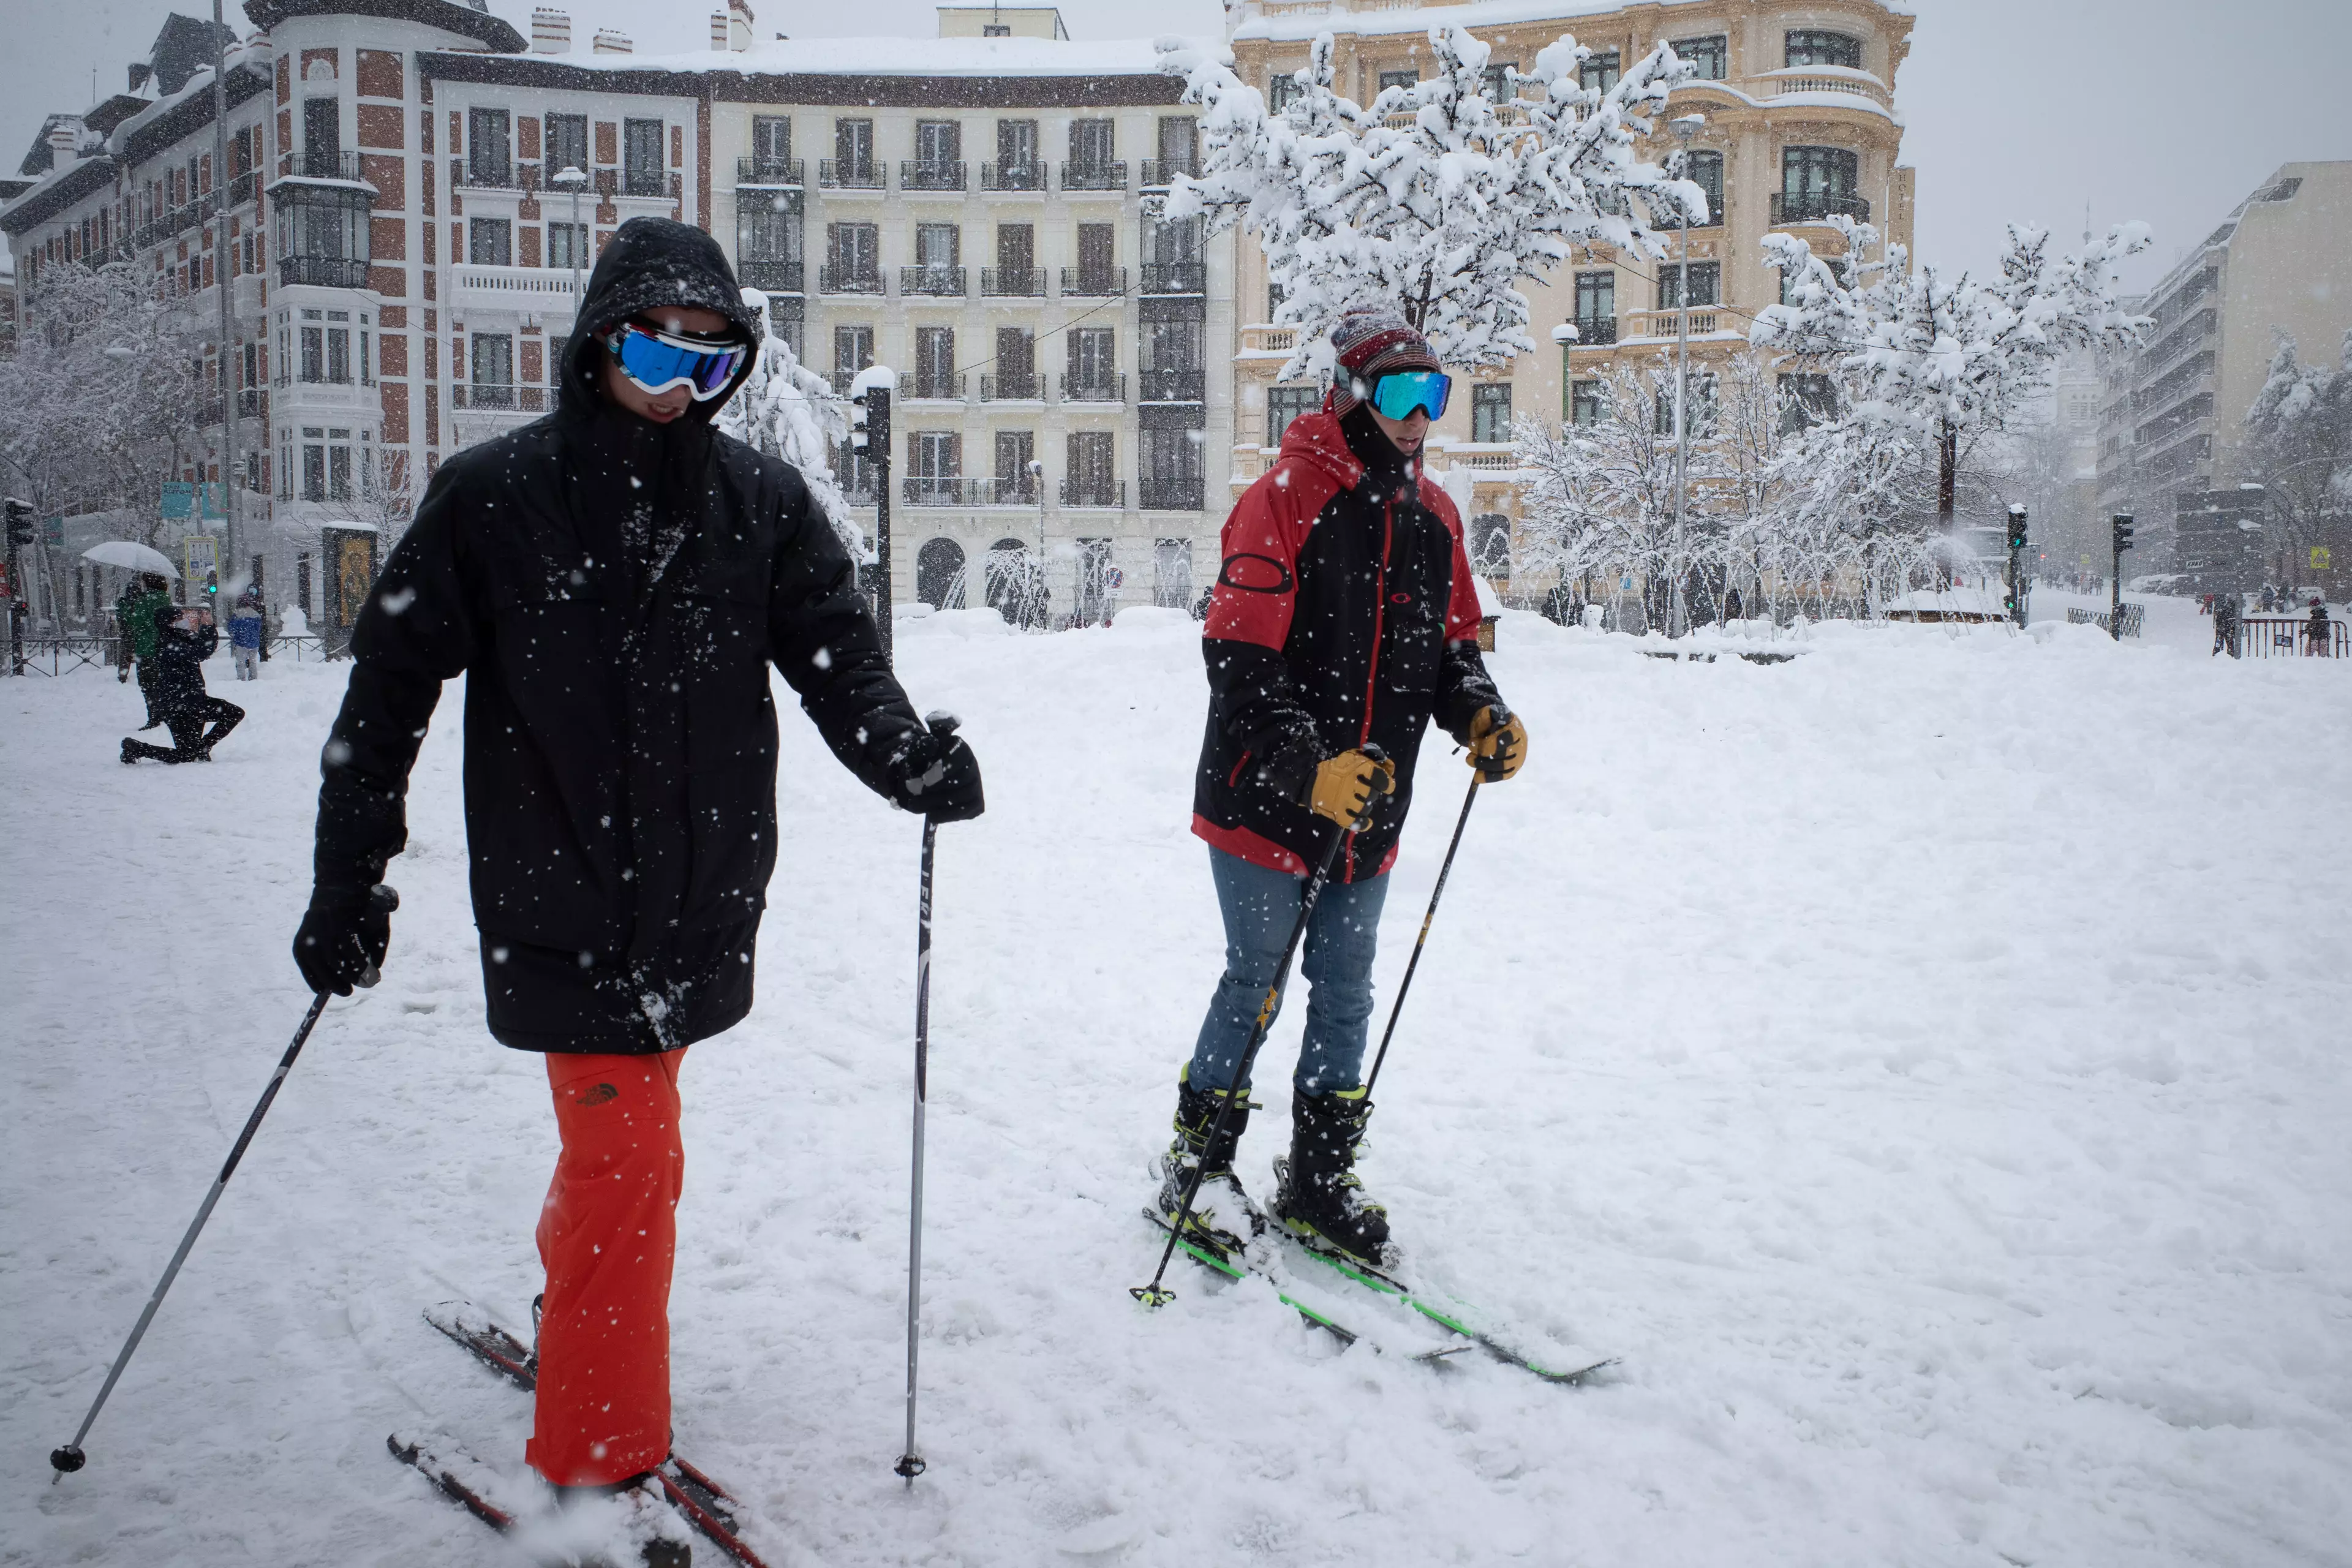 Some in Madrid have been using skis to get around.